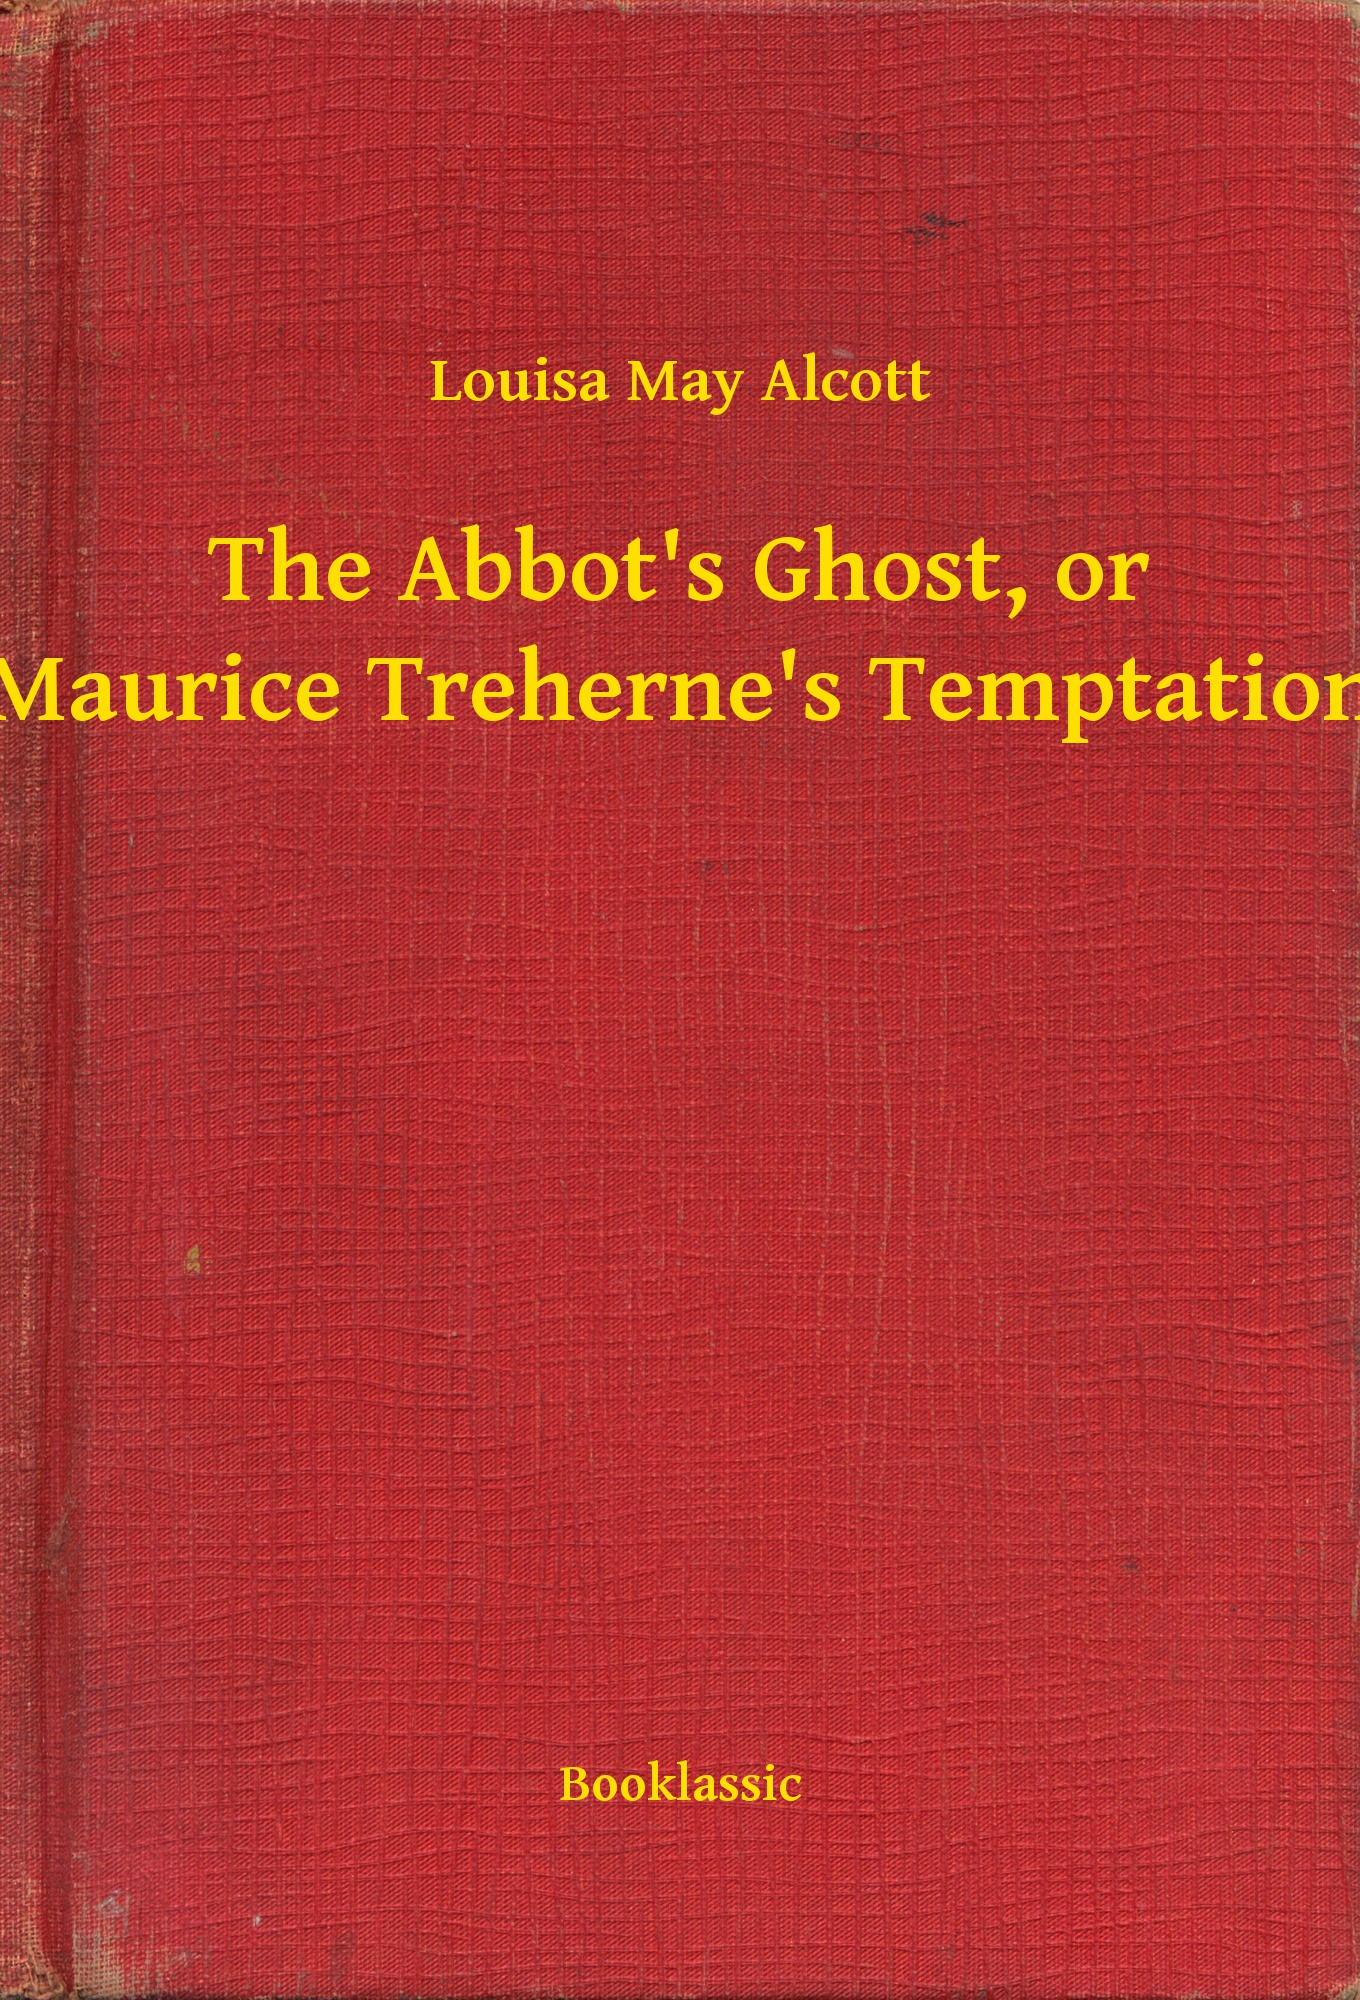 The Abbot"s Ghost, or Maurice Treherne"s Temptation